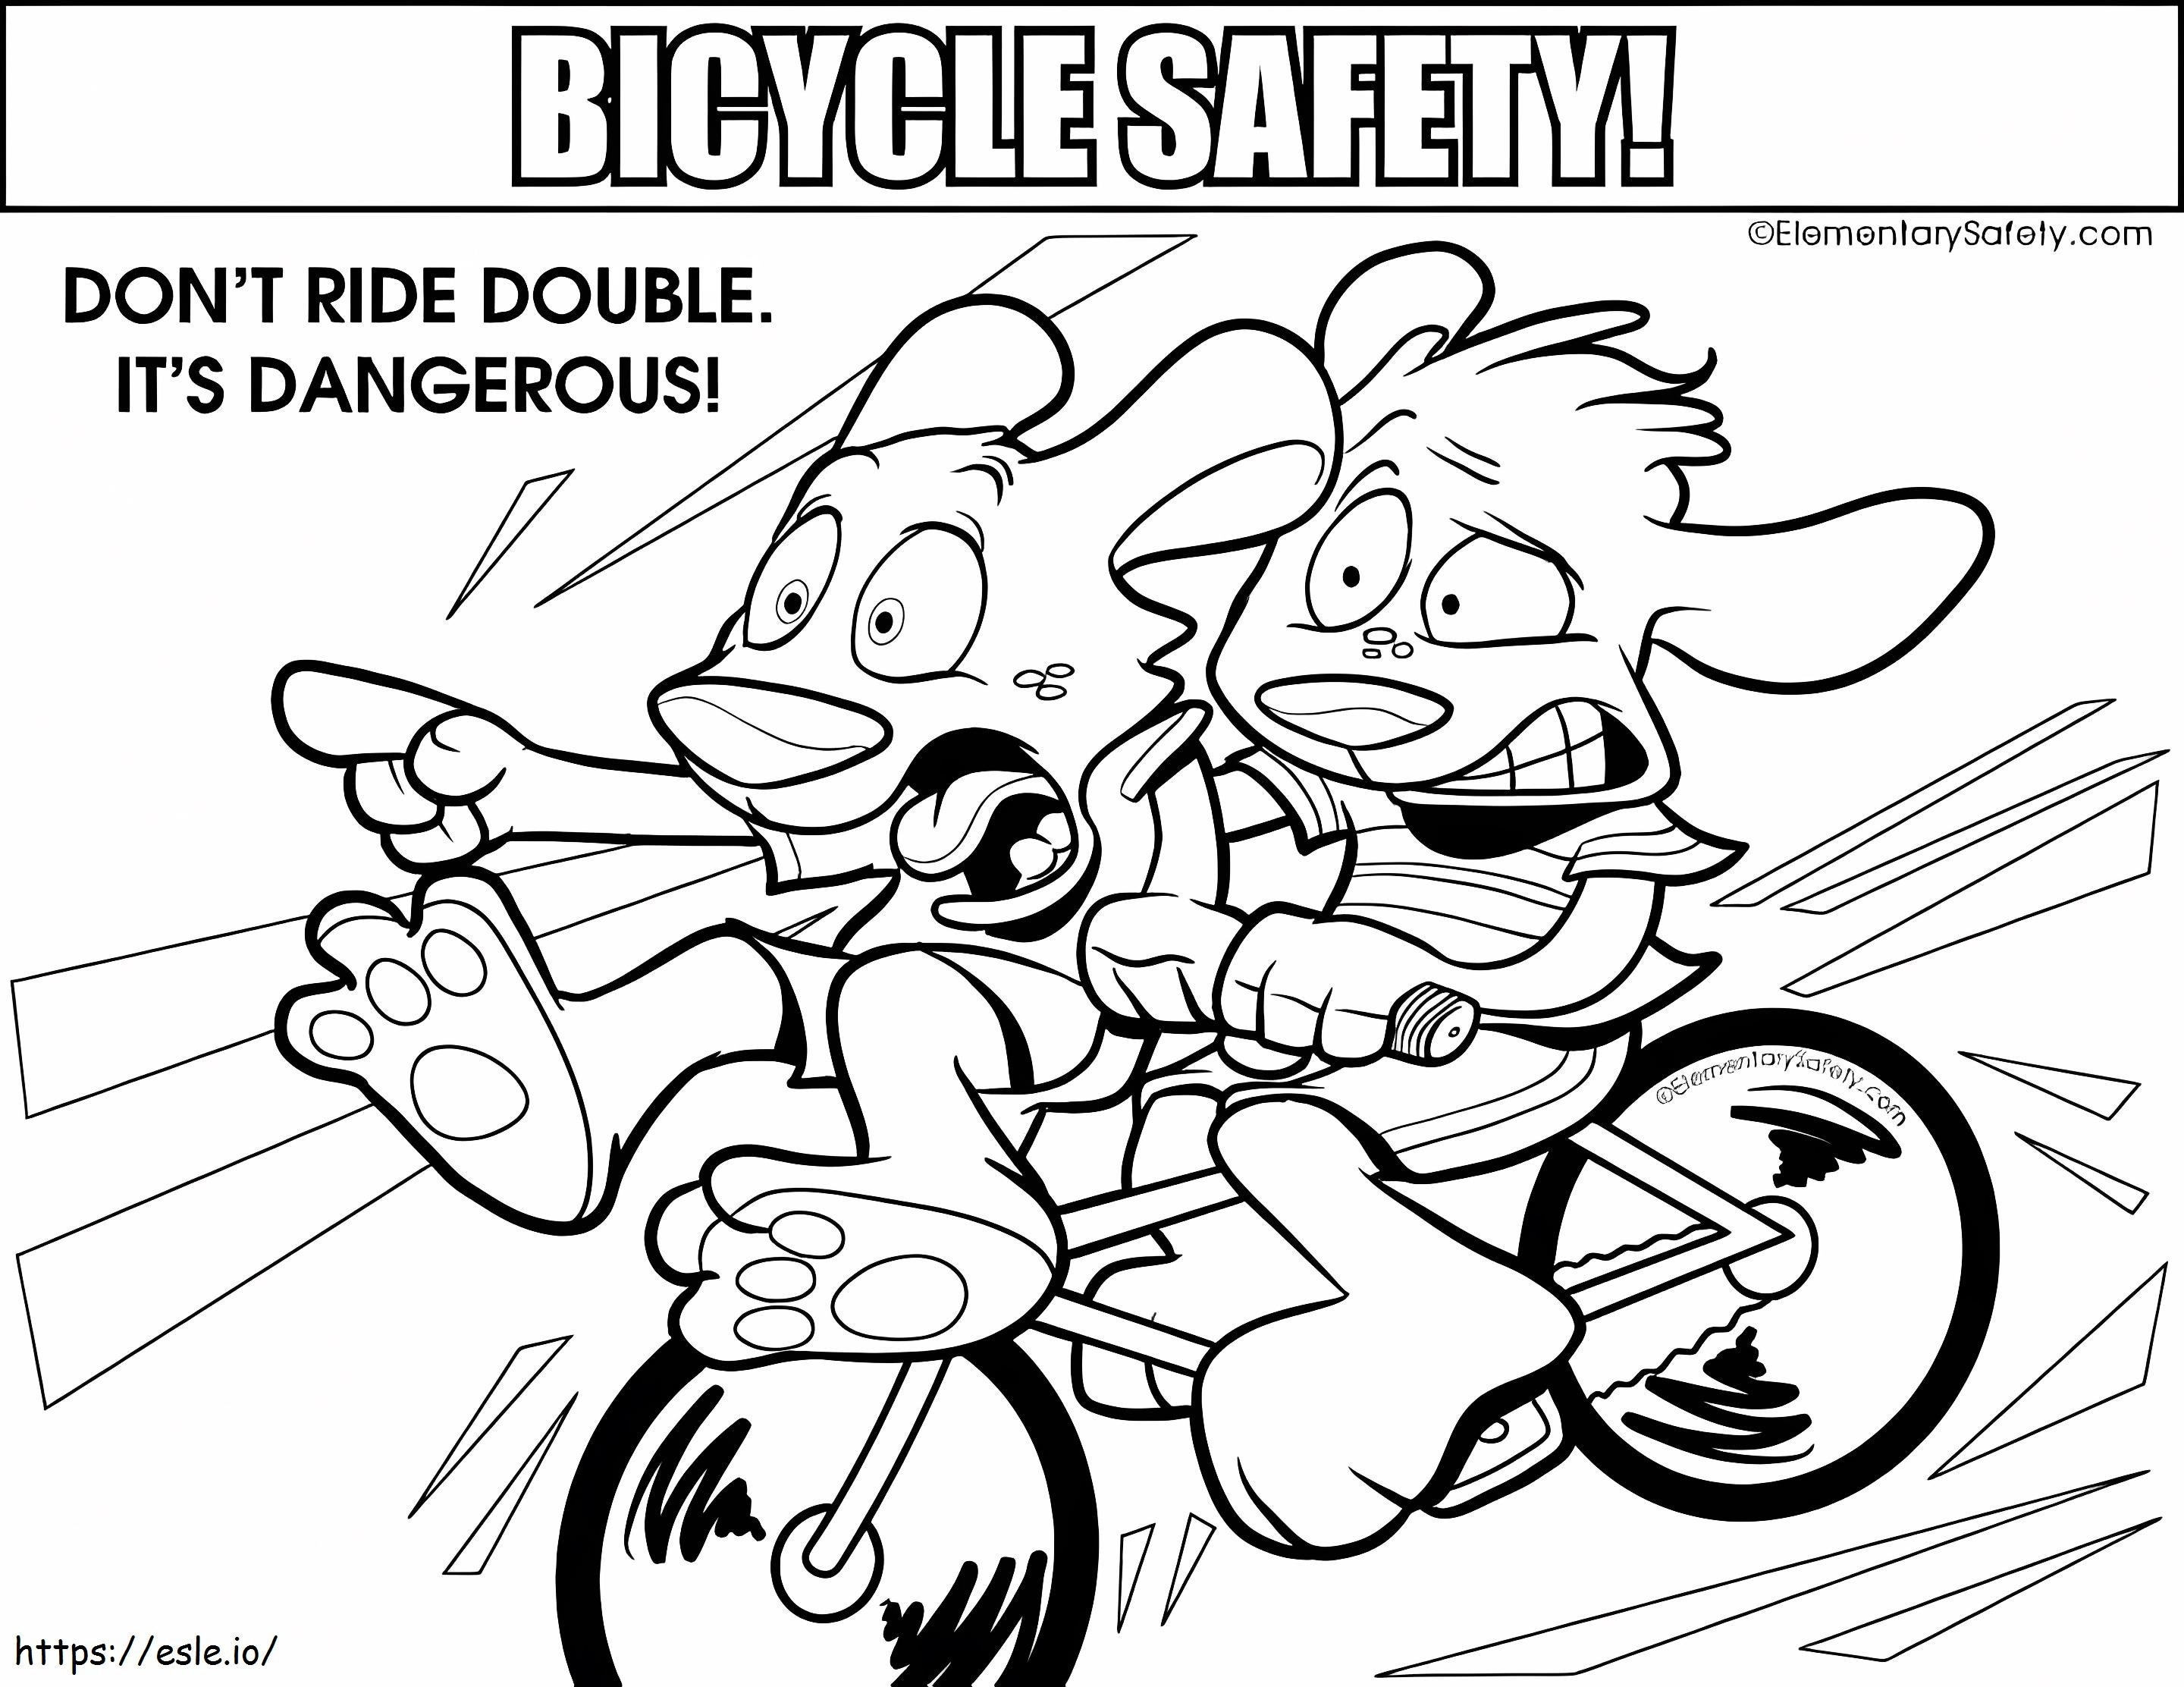 Dont Ride Double Bicycle Safety coloring page